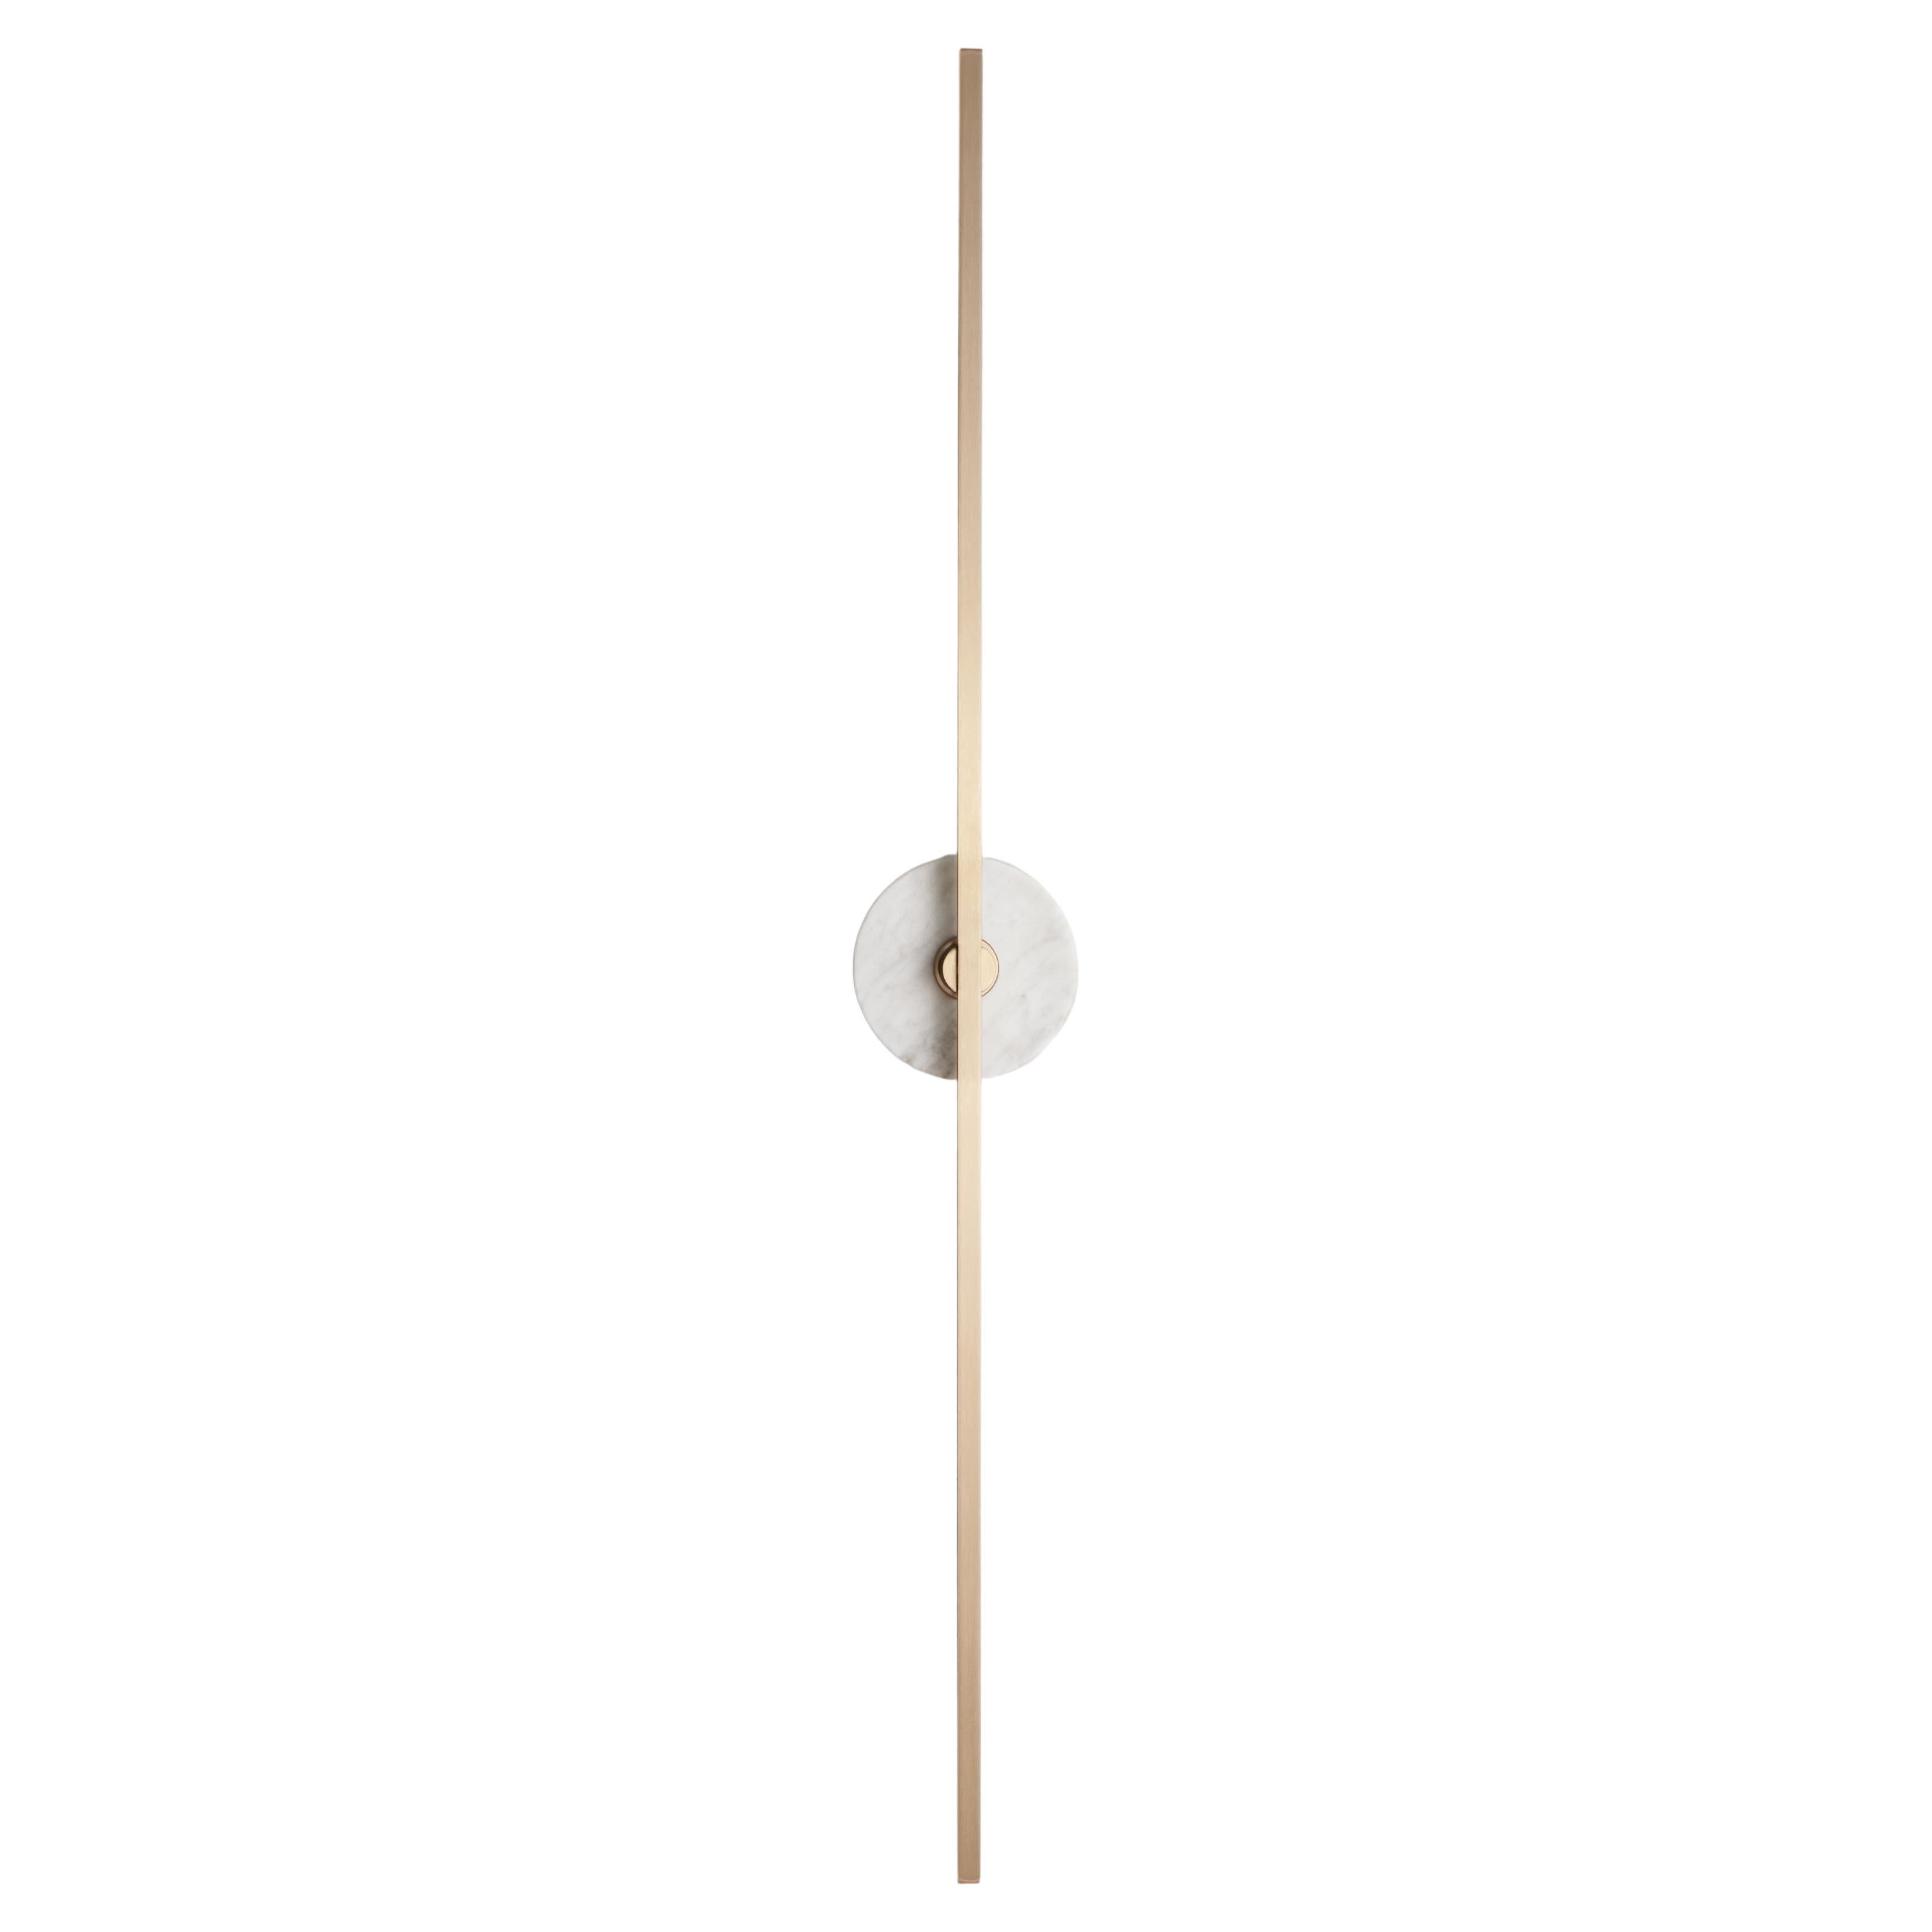 Essential Italian Wall Sconce "Grand Stick", Brass and Carrara Marble